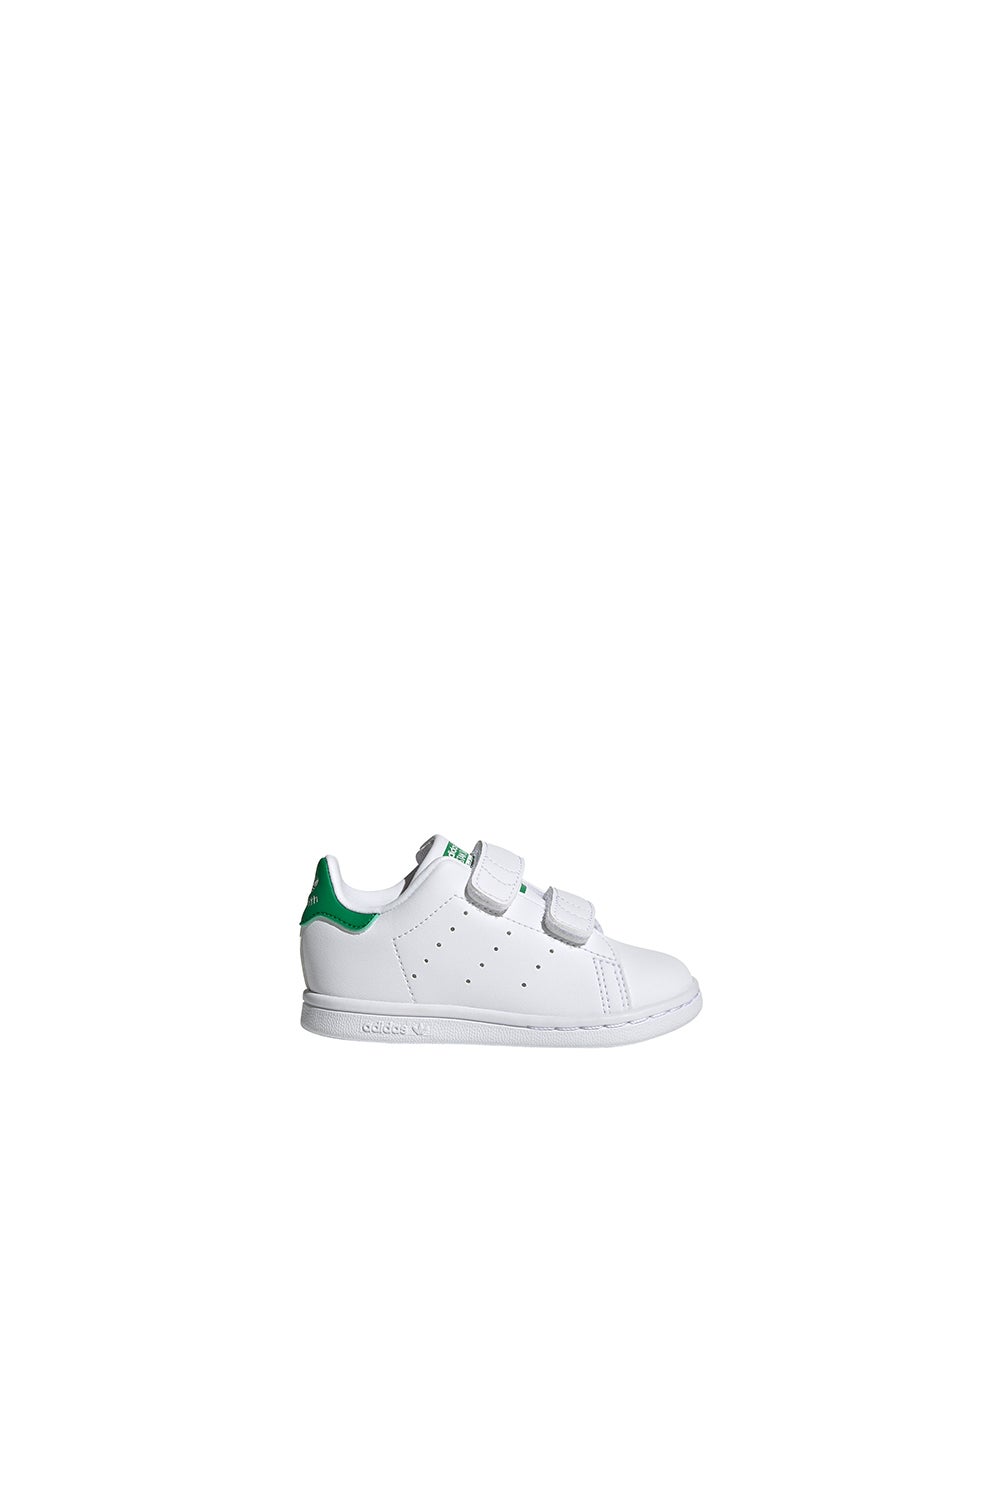 adidas Stan Smith Infant Shoes Cloud White/Green